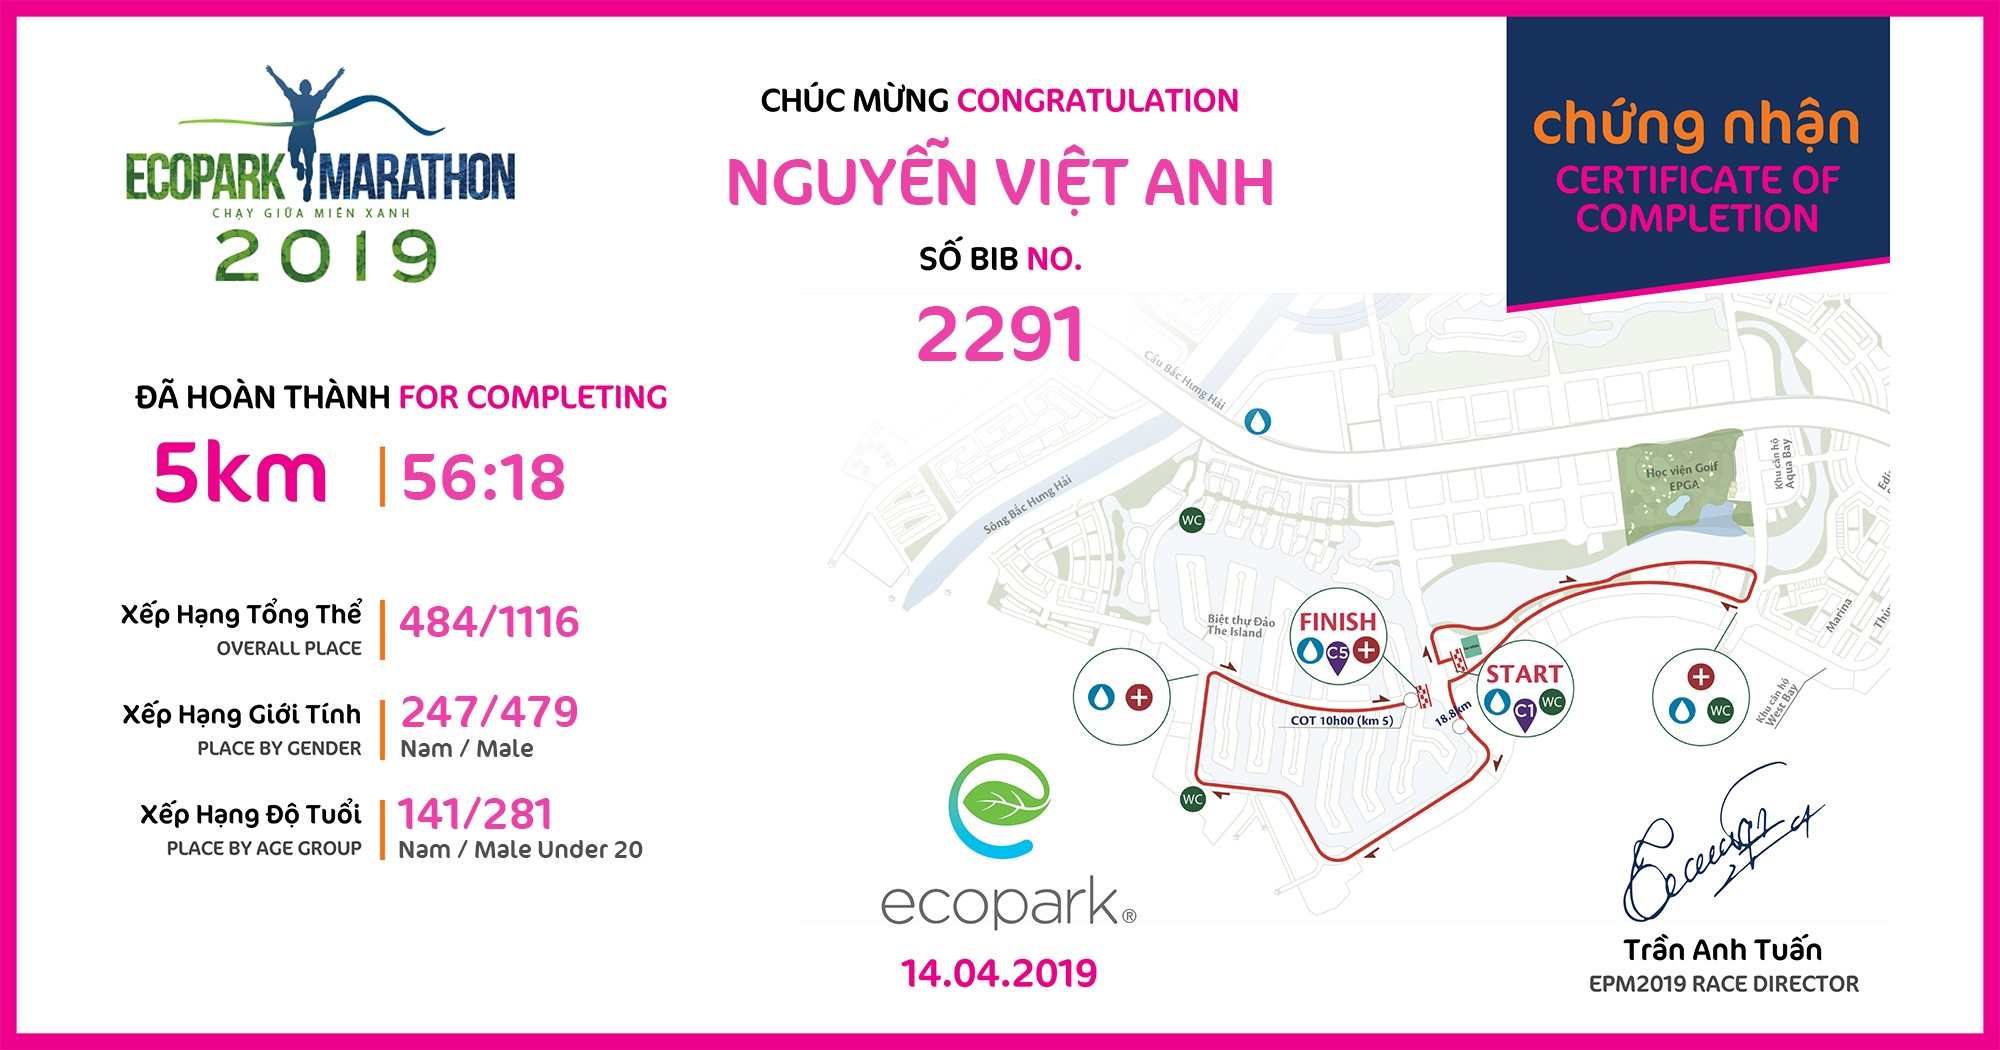 2291 - Nguyễn Việt Anh